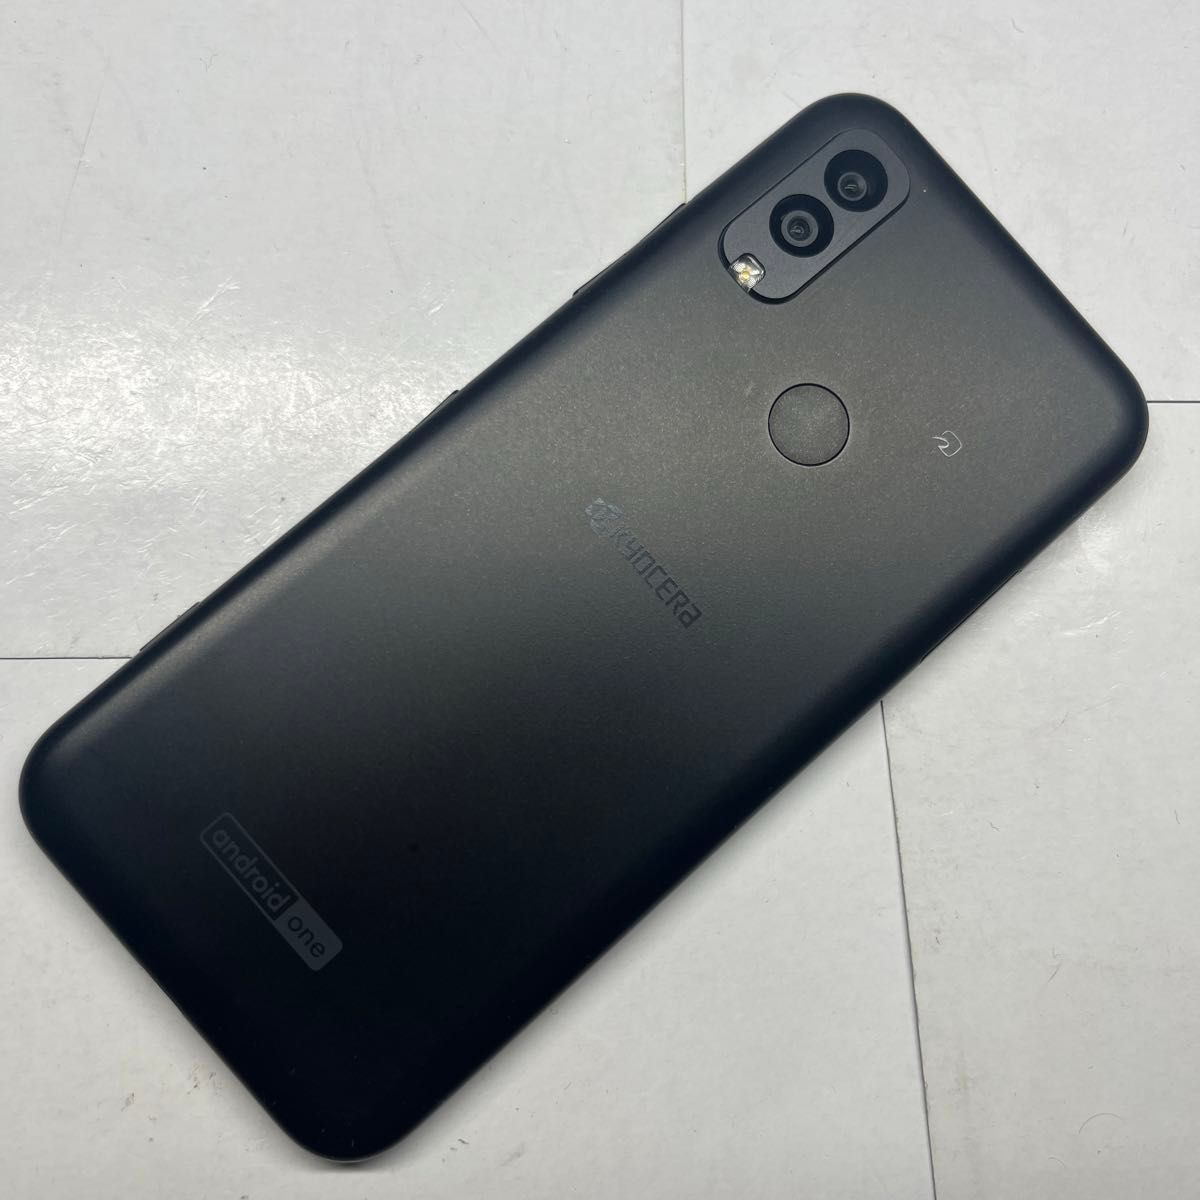 KYOCERA Android one S9-KC 64GB ブラック　バッテリー状態良好